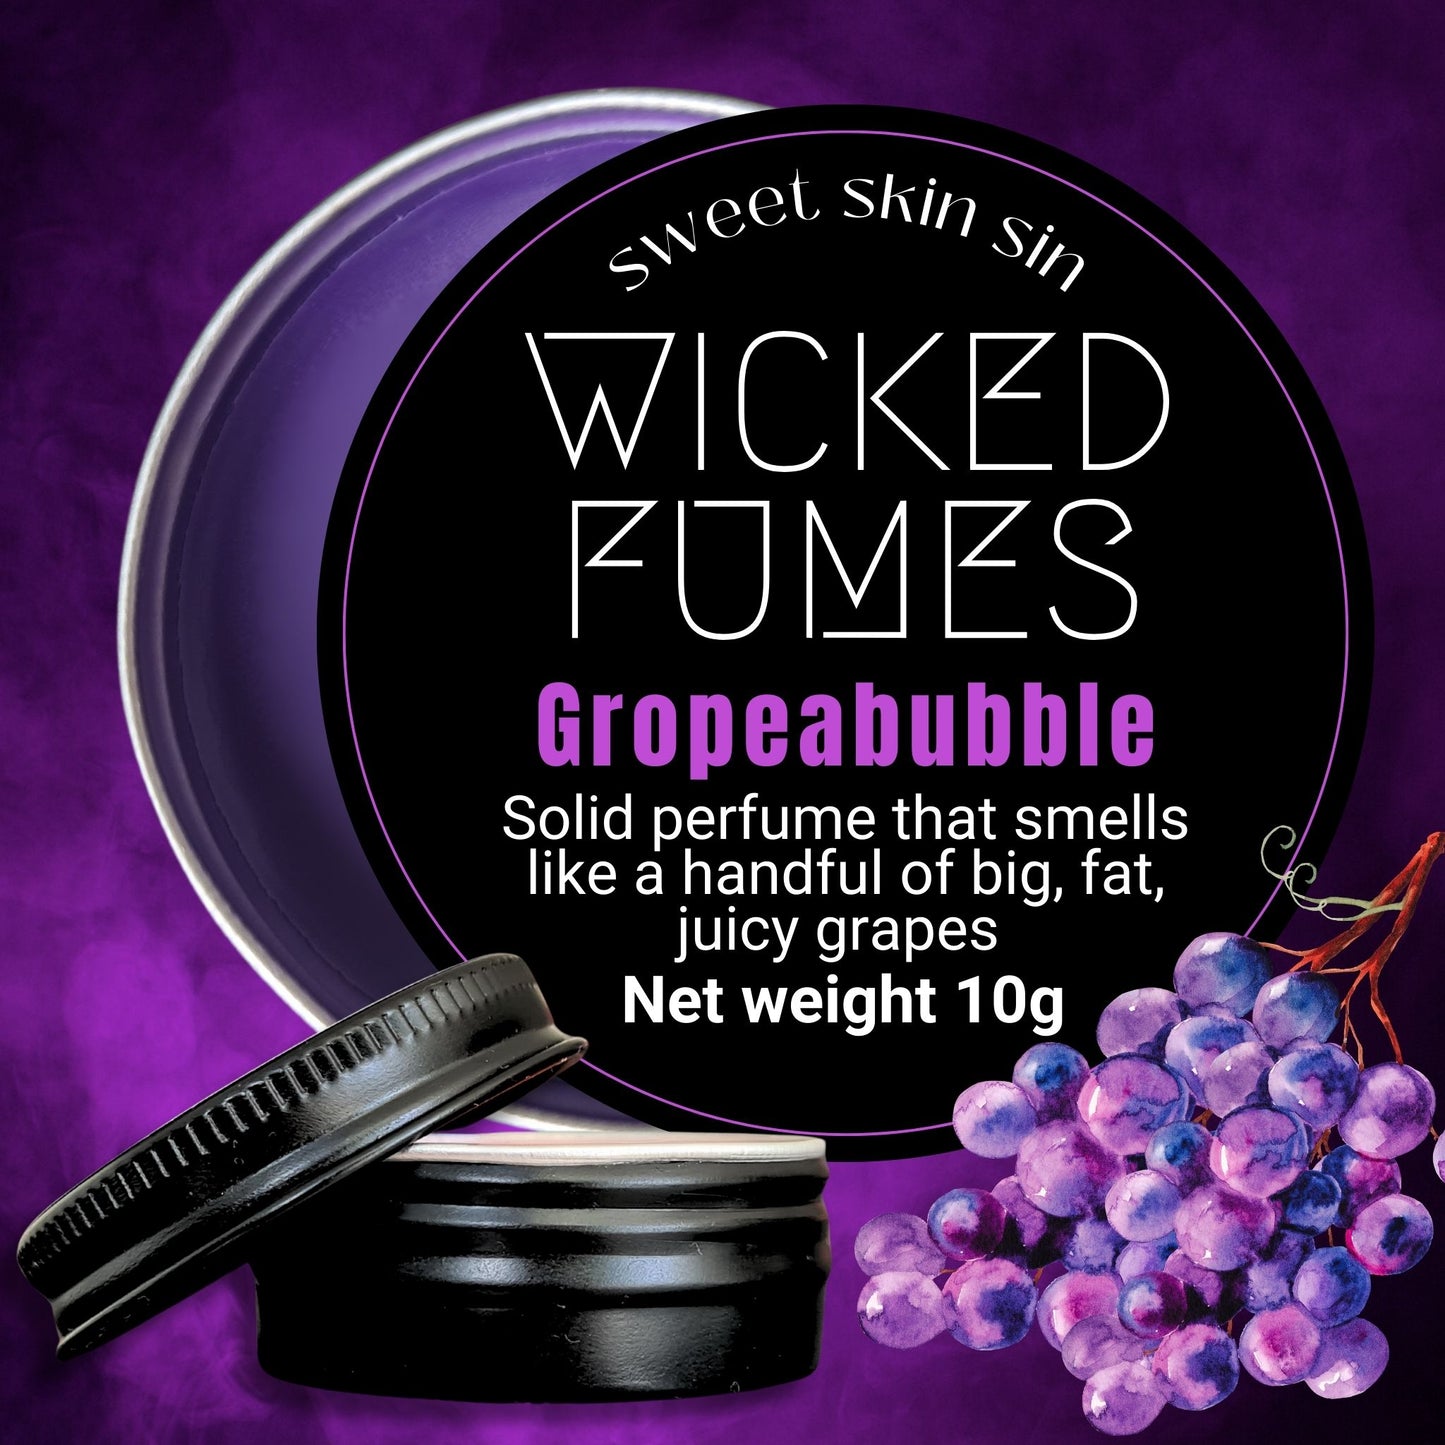 An image of a solid perfume called Gropeabubble from Wicked Fumes in a small black round jar against a purple smoke background with some grapes pictured